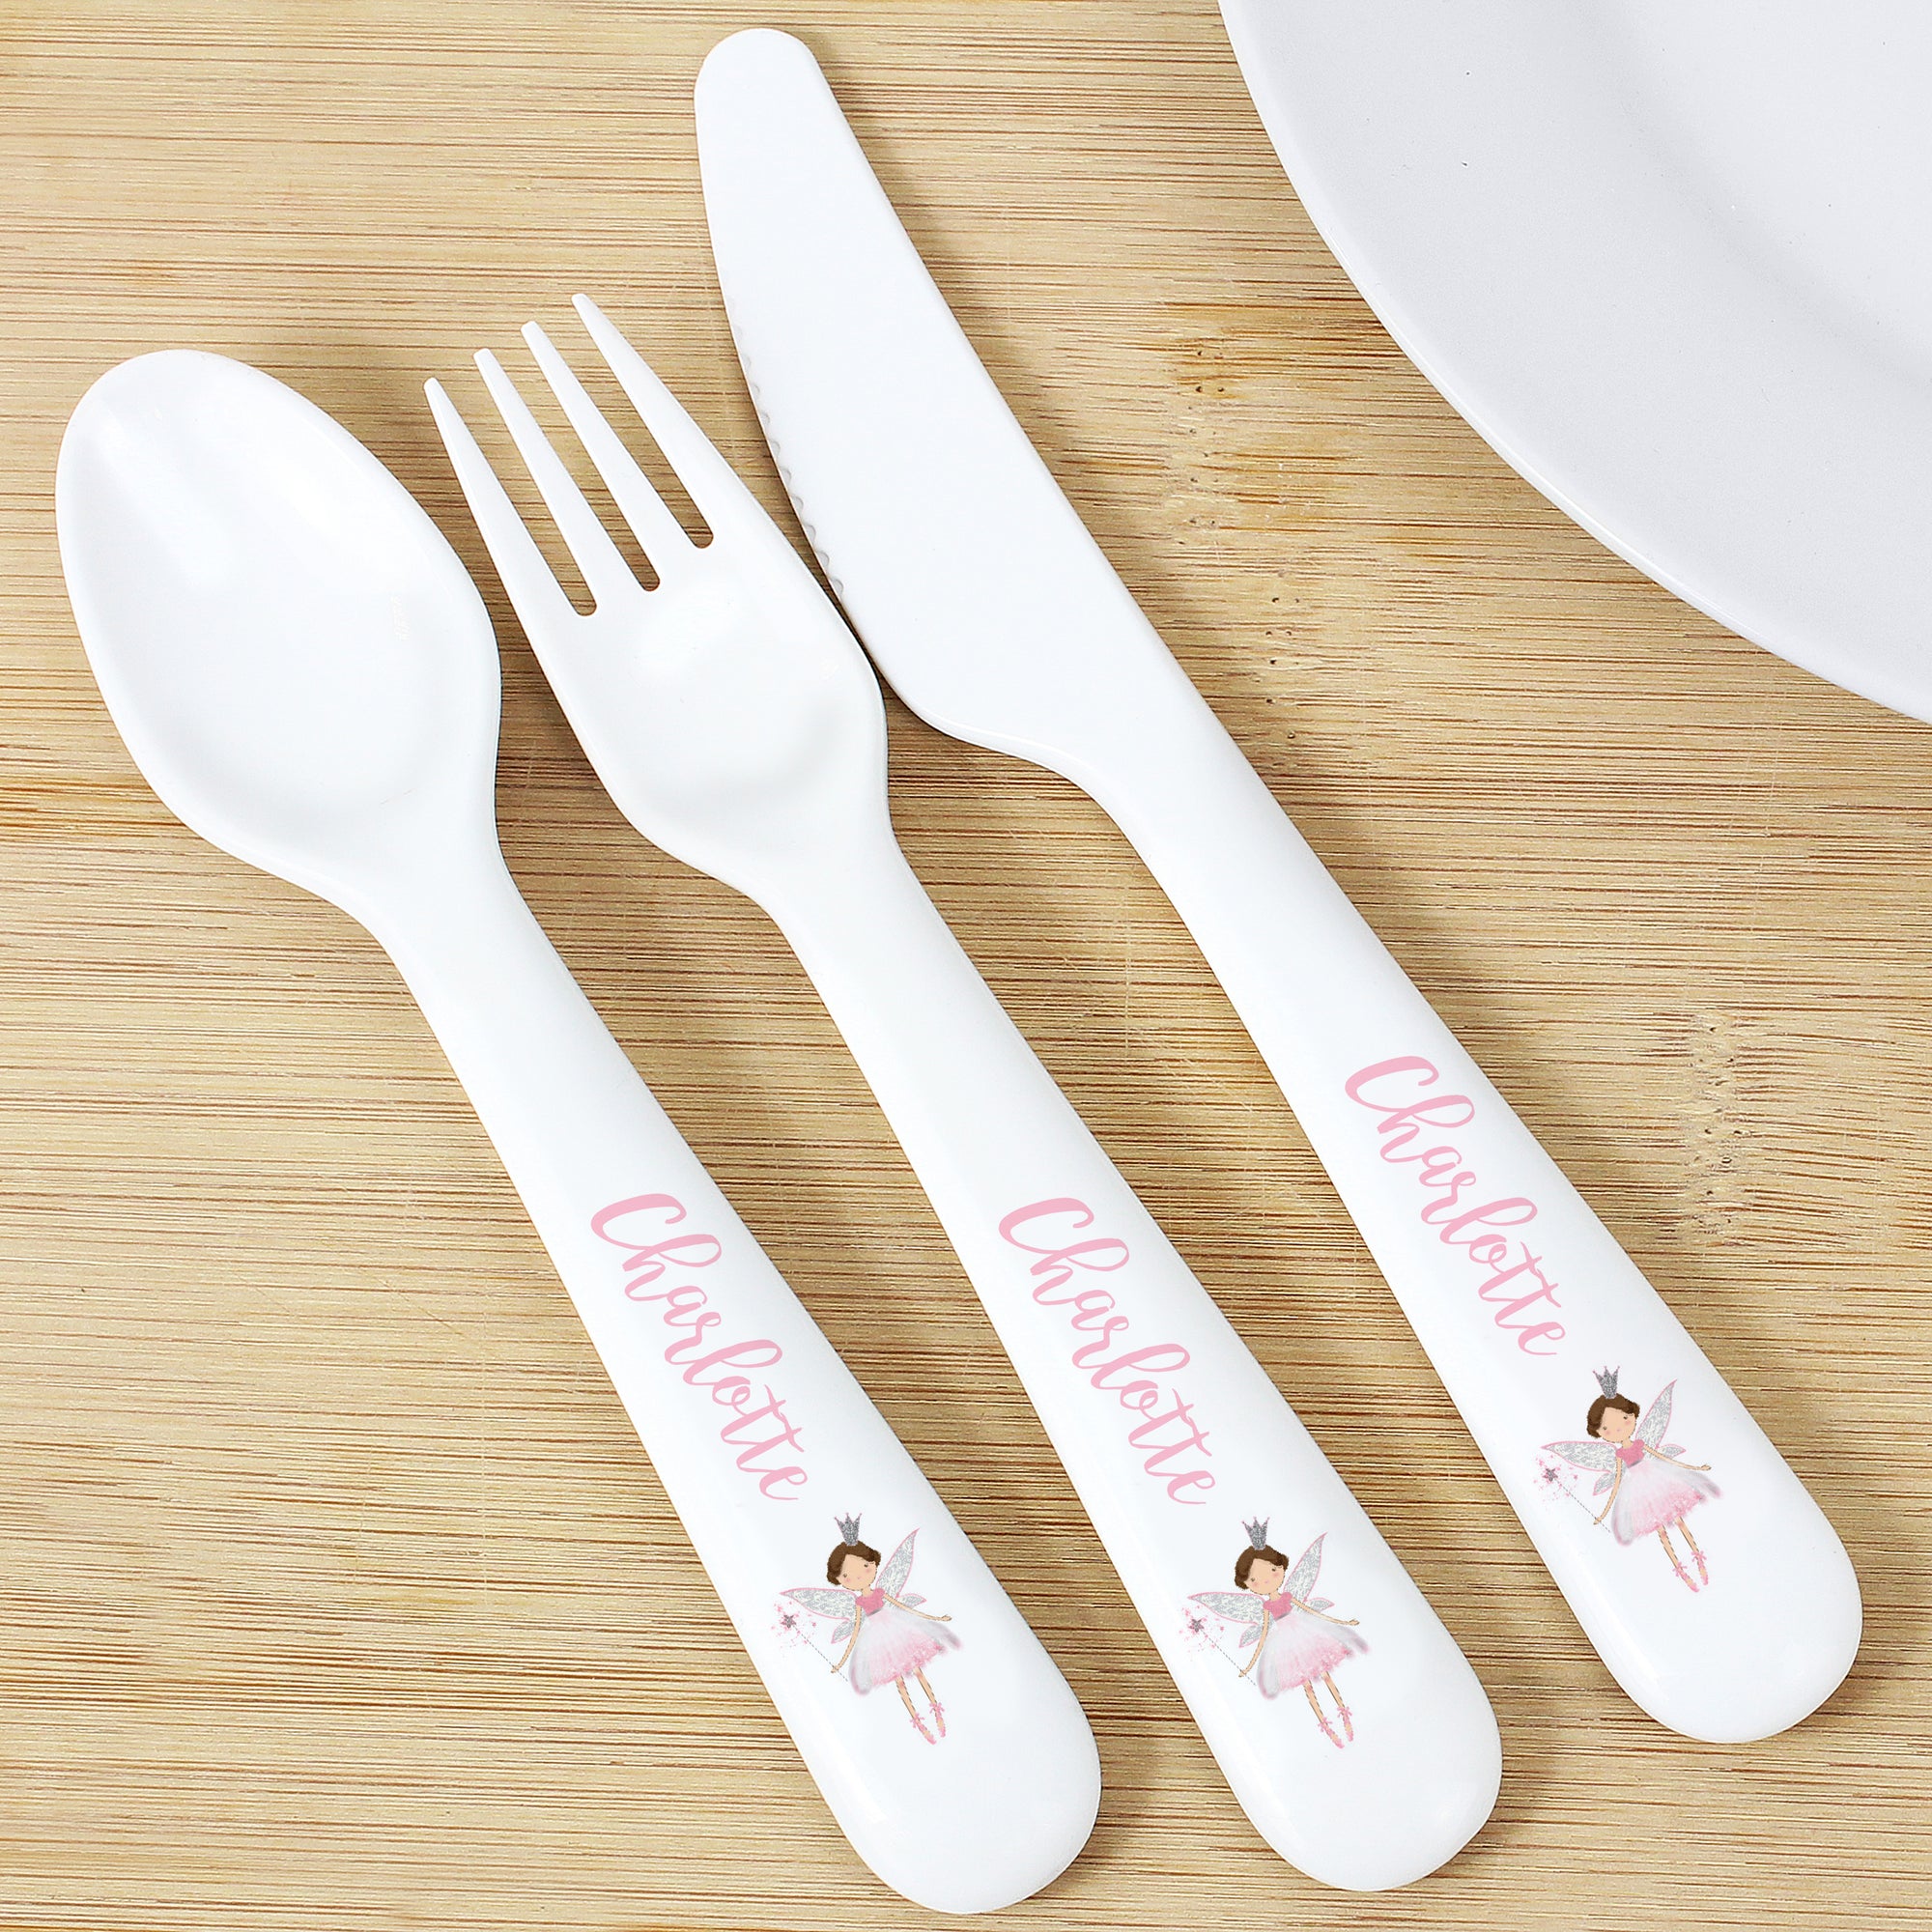 Image of a plastic BPA free child's cutlery set. The cutlery set comprises of a spoon, fork and knife that are white and there is an image of a fairy at the end of the handle. The handles can also be personalised with a name of your choice of up to 12 characters which will be printed in a pink cursive font.